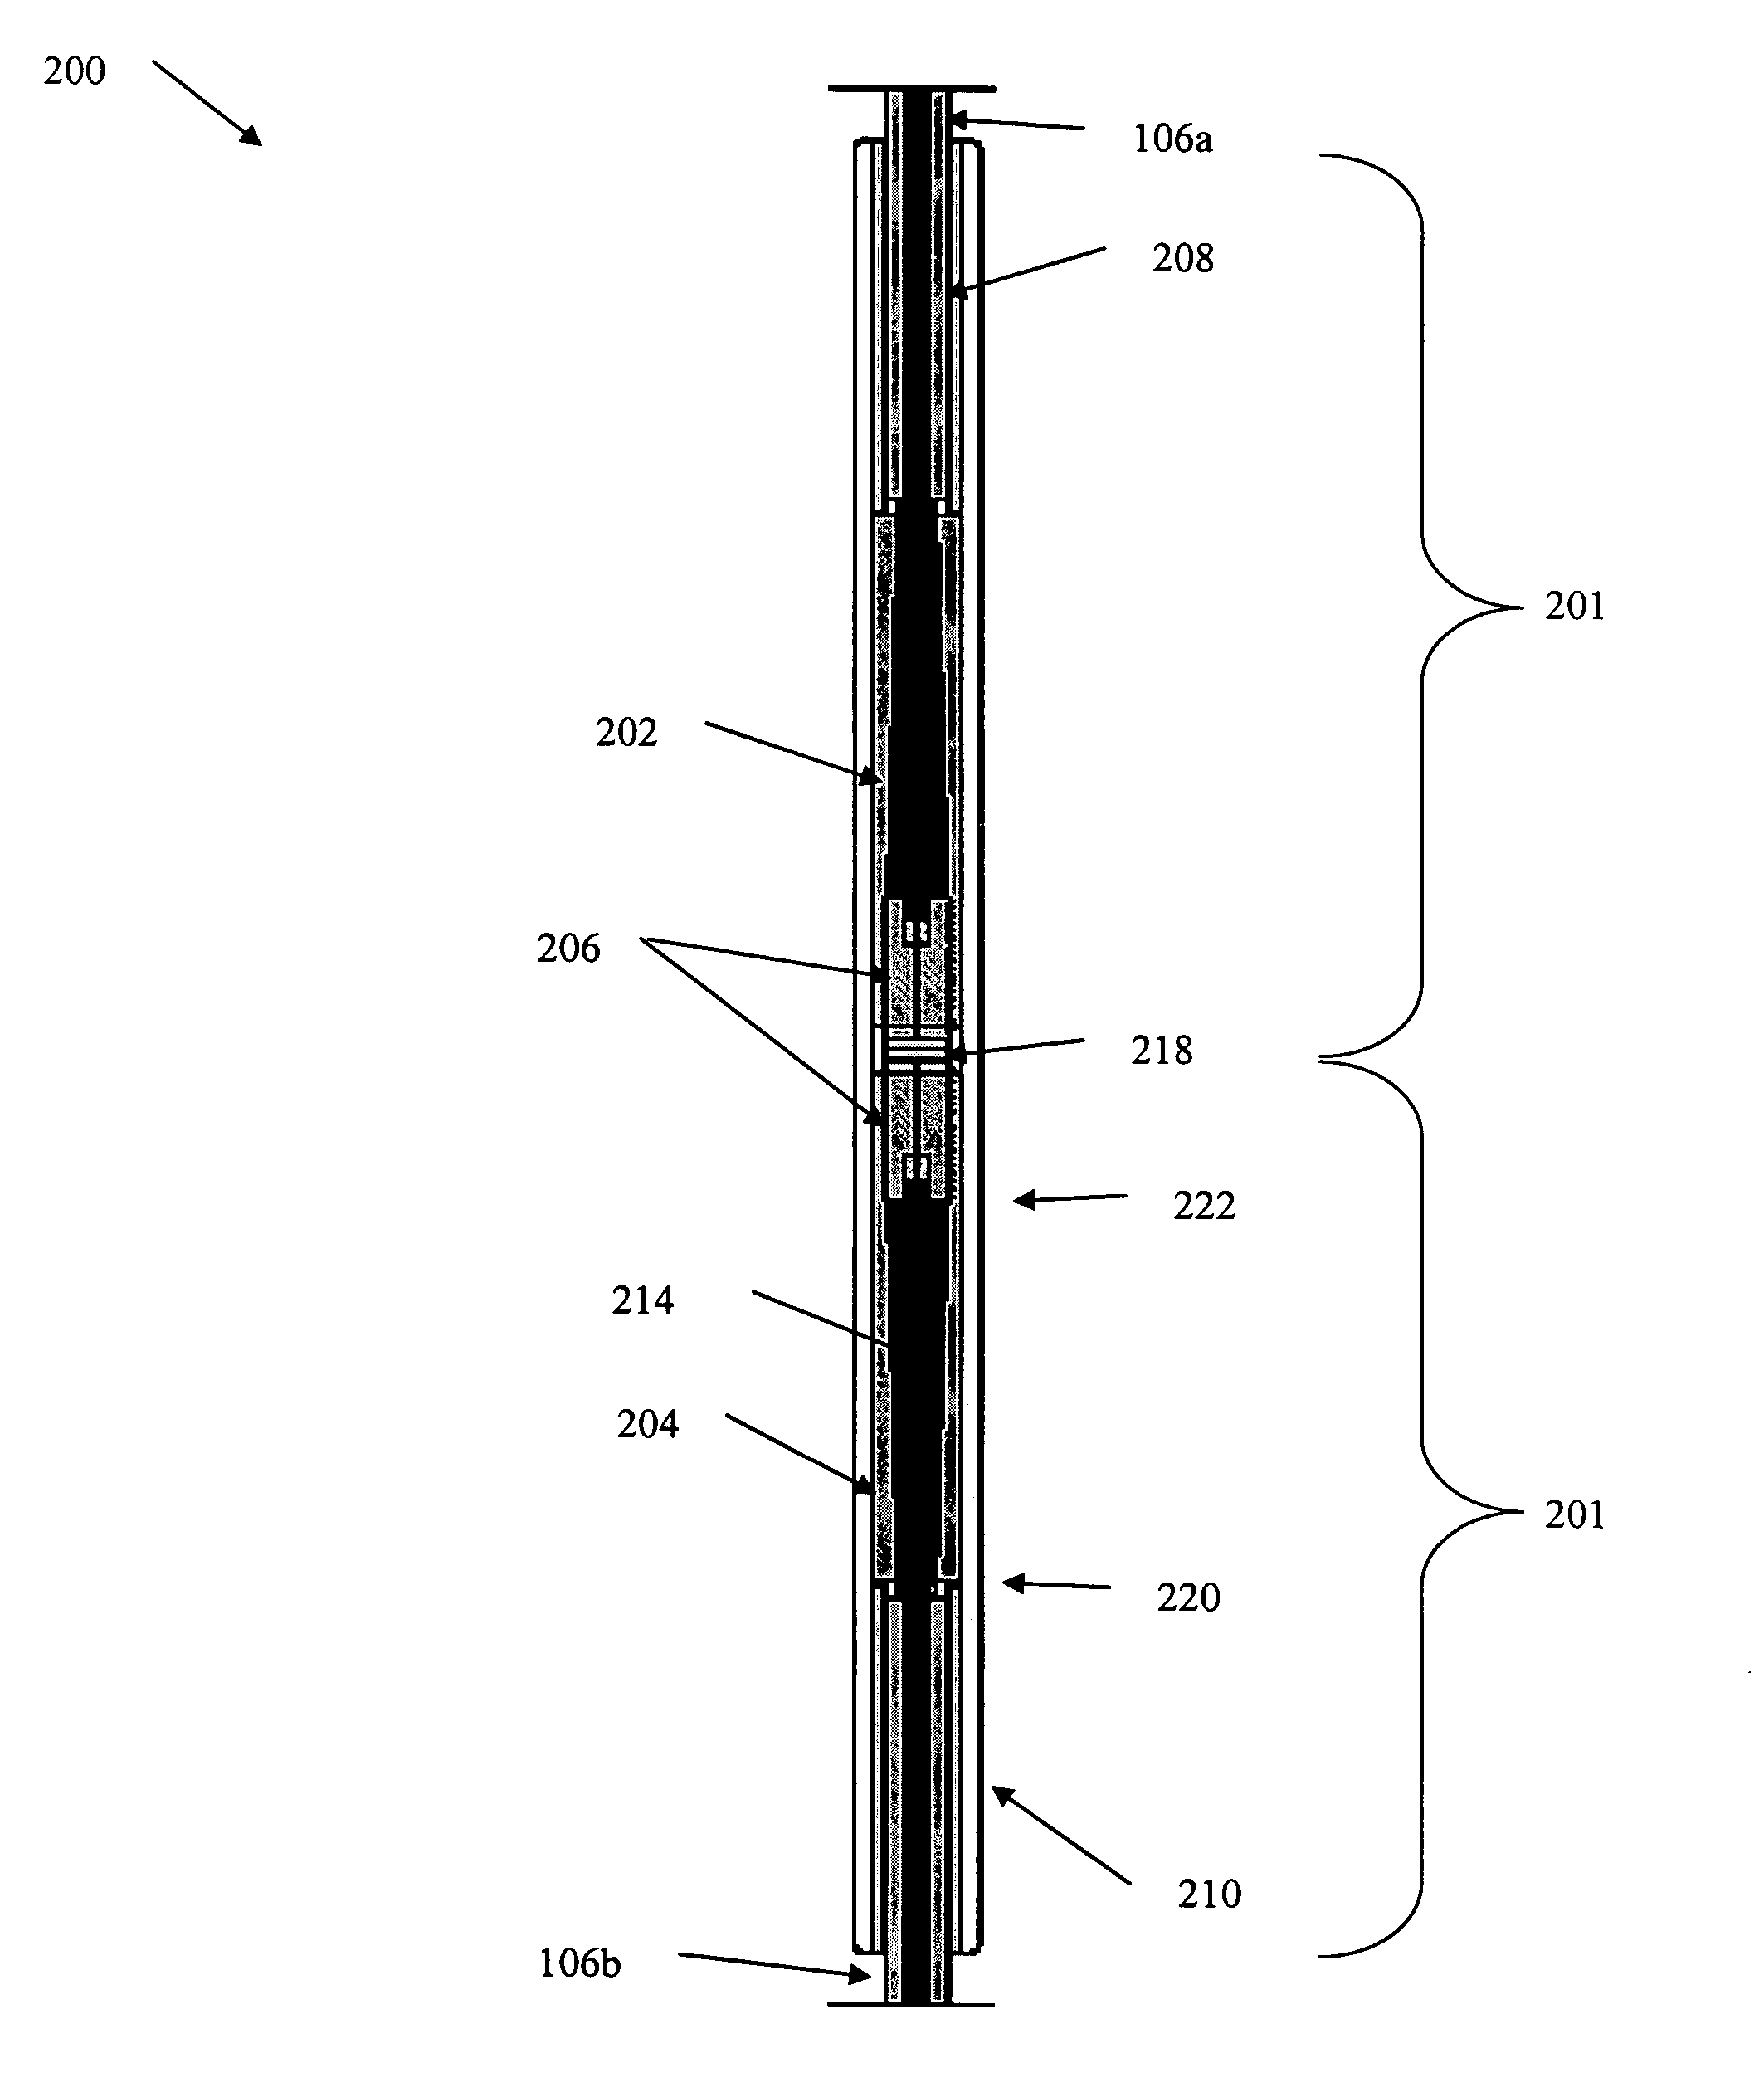 Collet-type splice and dead end use with an aluminum conductor composite core reinforced cable